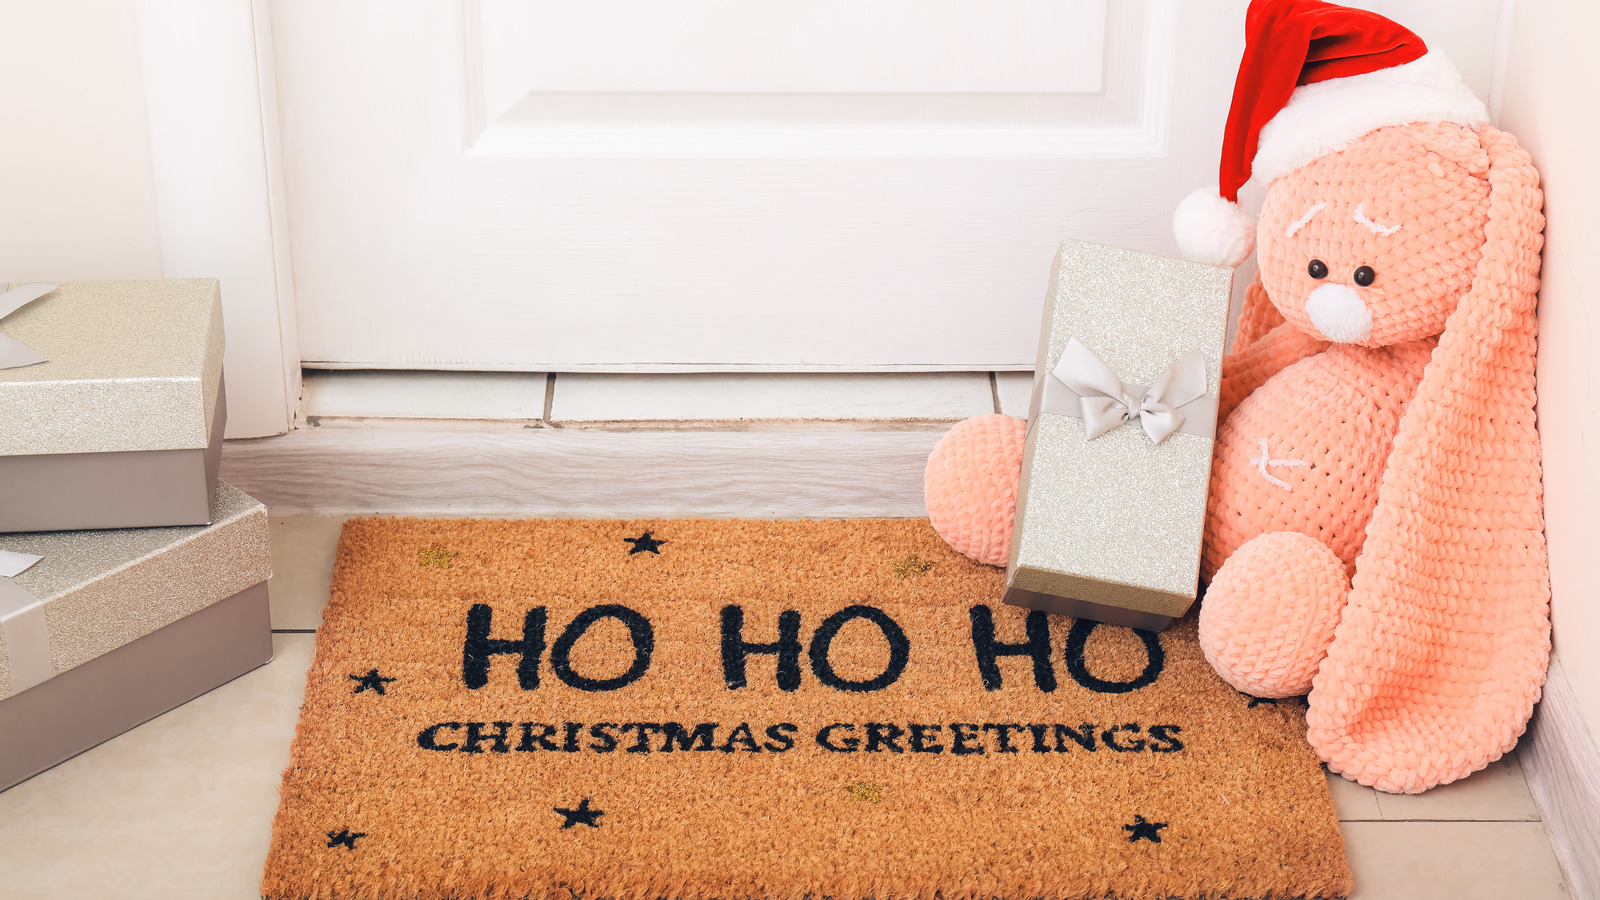 https://www.housedigest.com/img/gallery/the-best-christmas-doormats-for-adding-festive-flair-to-your-front-porch/l-intro-1693936990.jpg